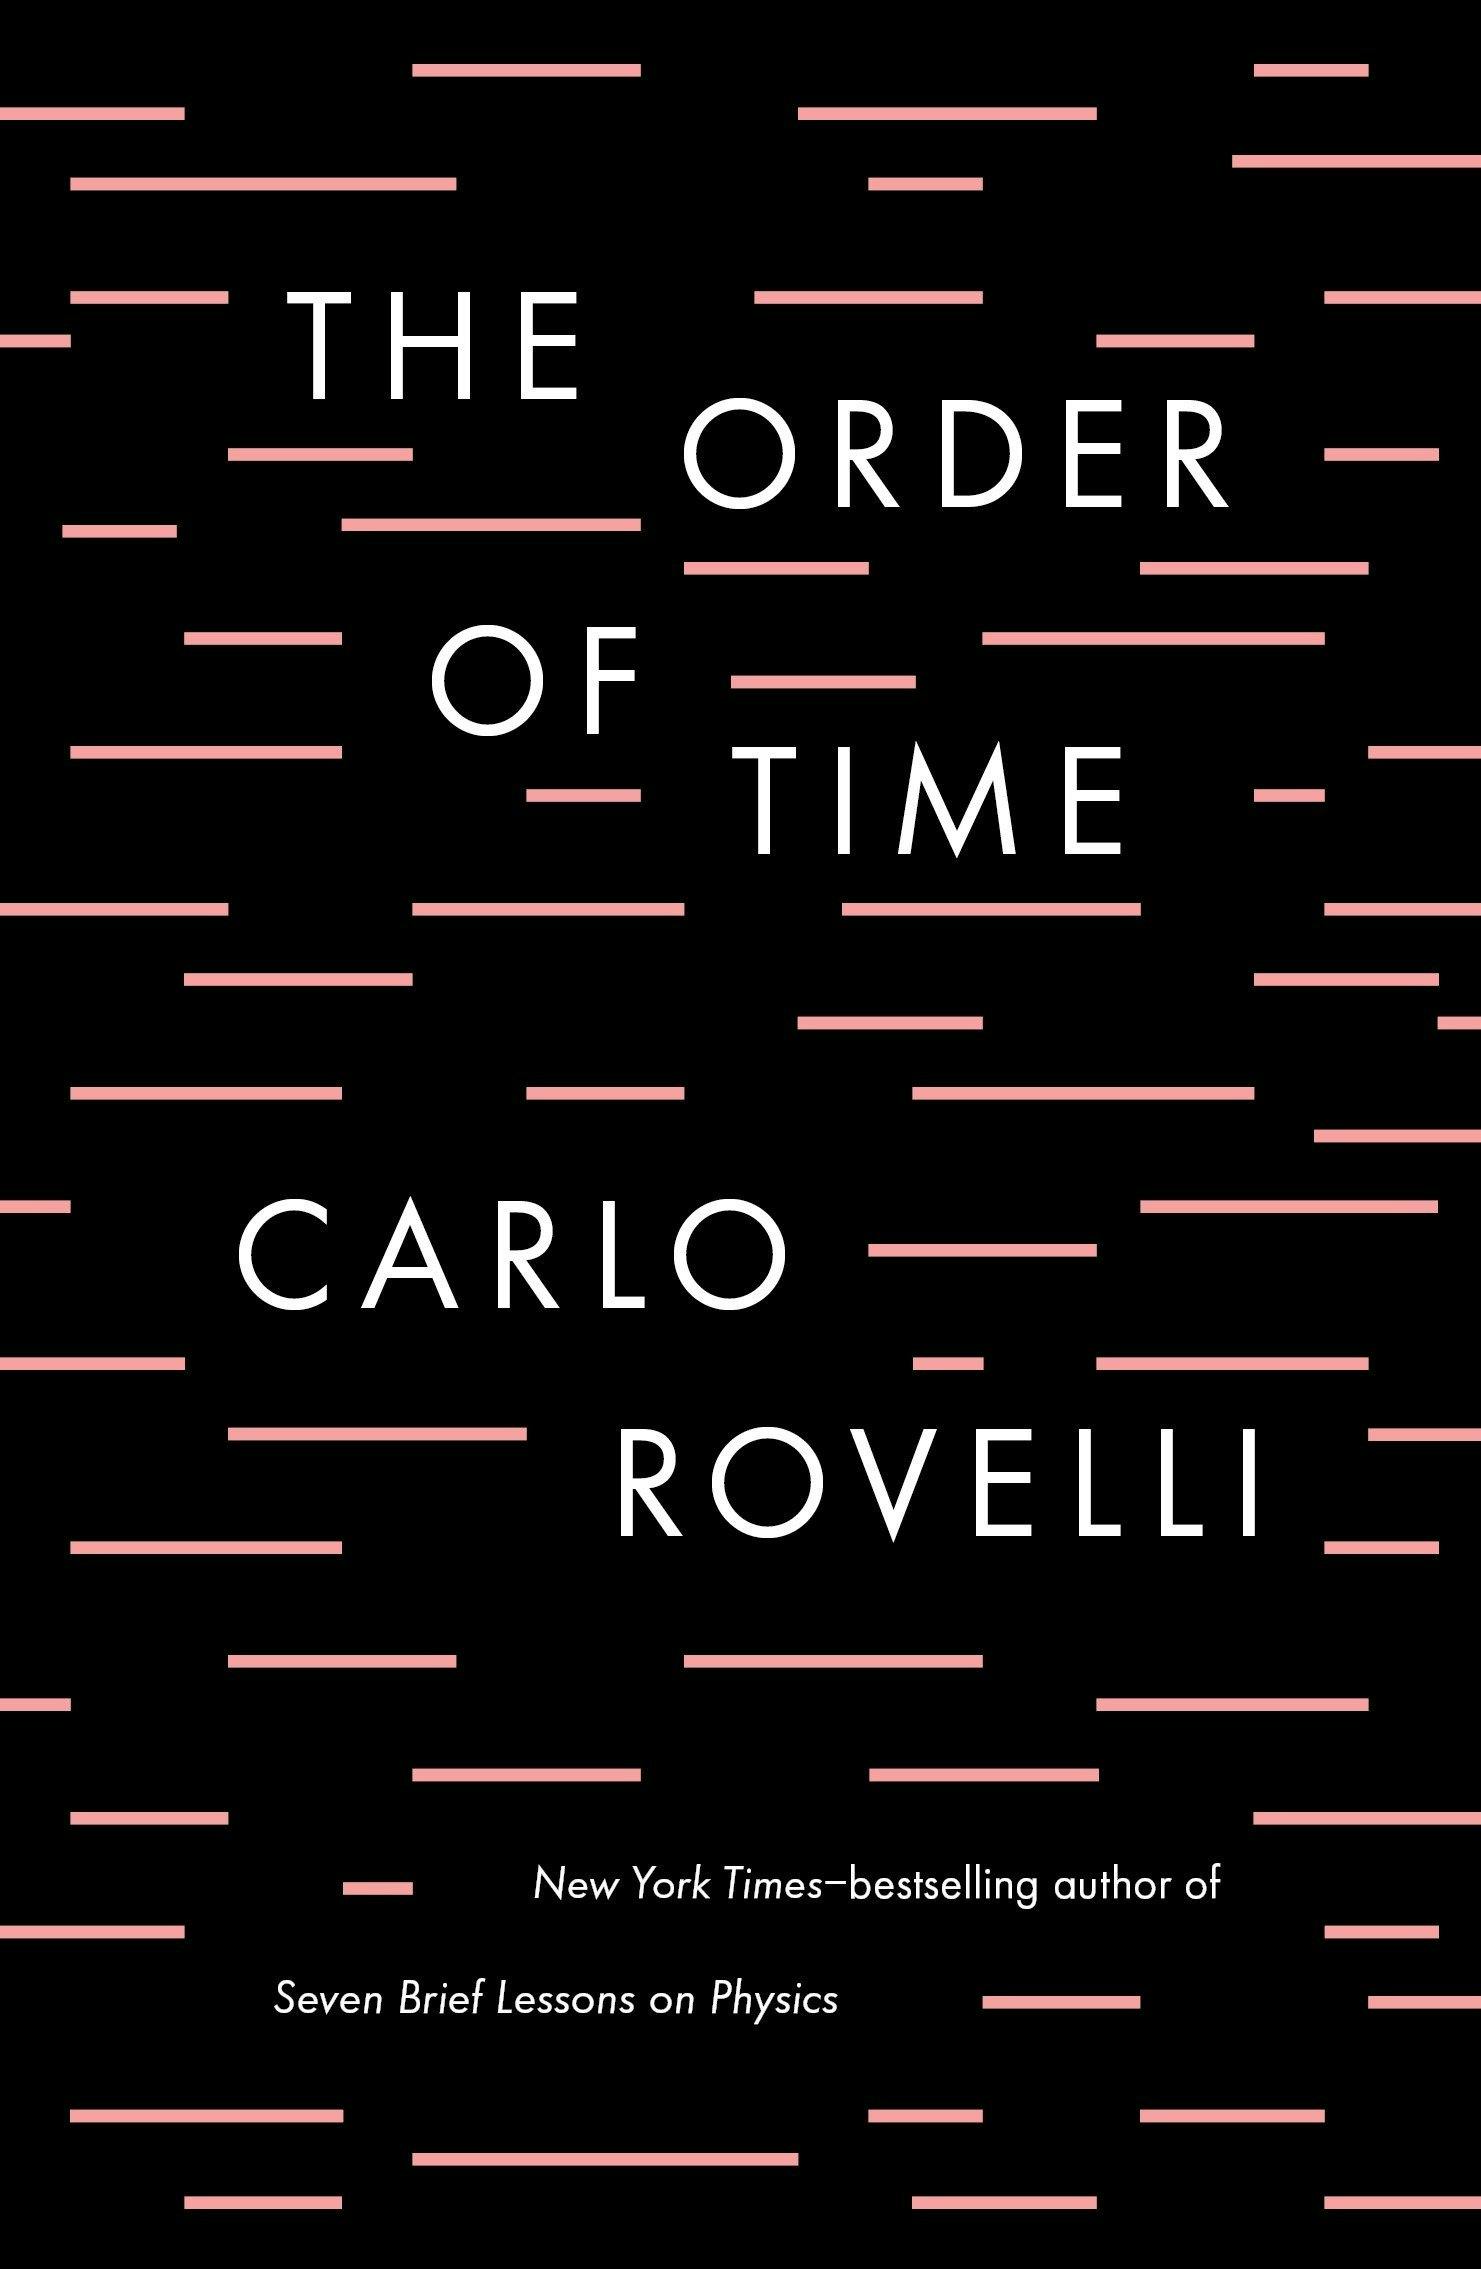 The media cover for “The Order of Time” by Carlo Rovelli